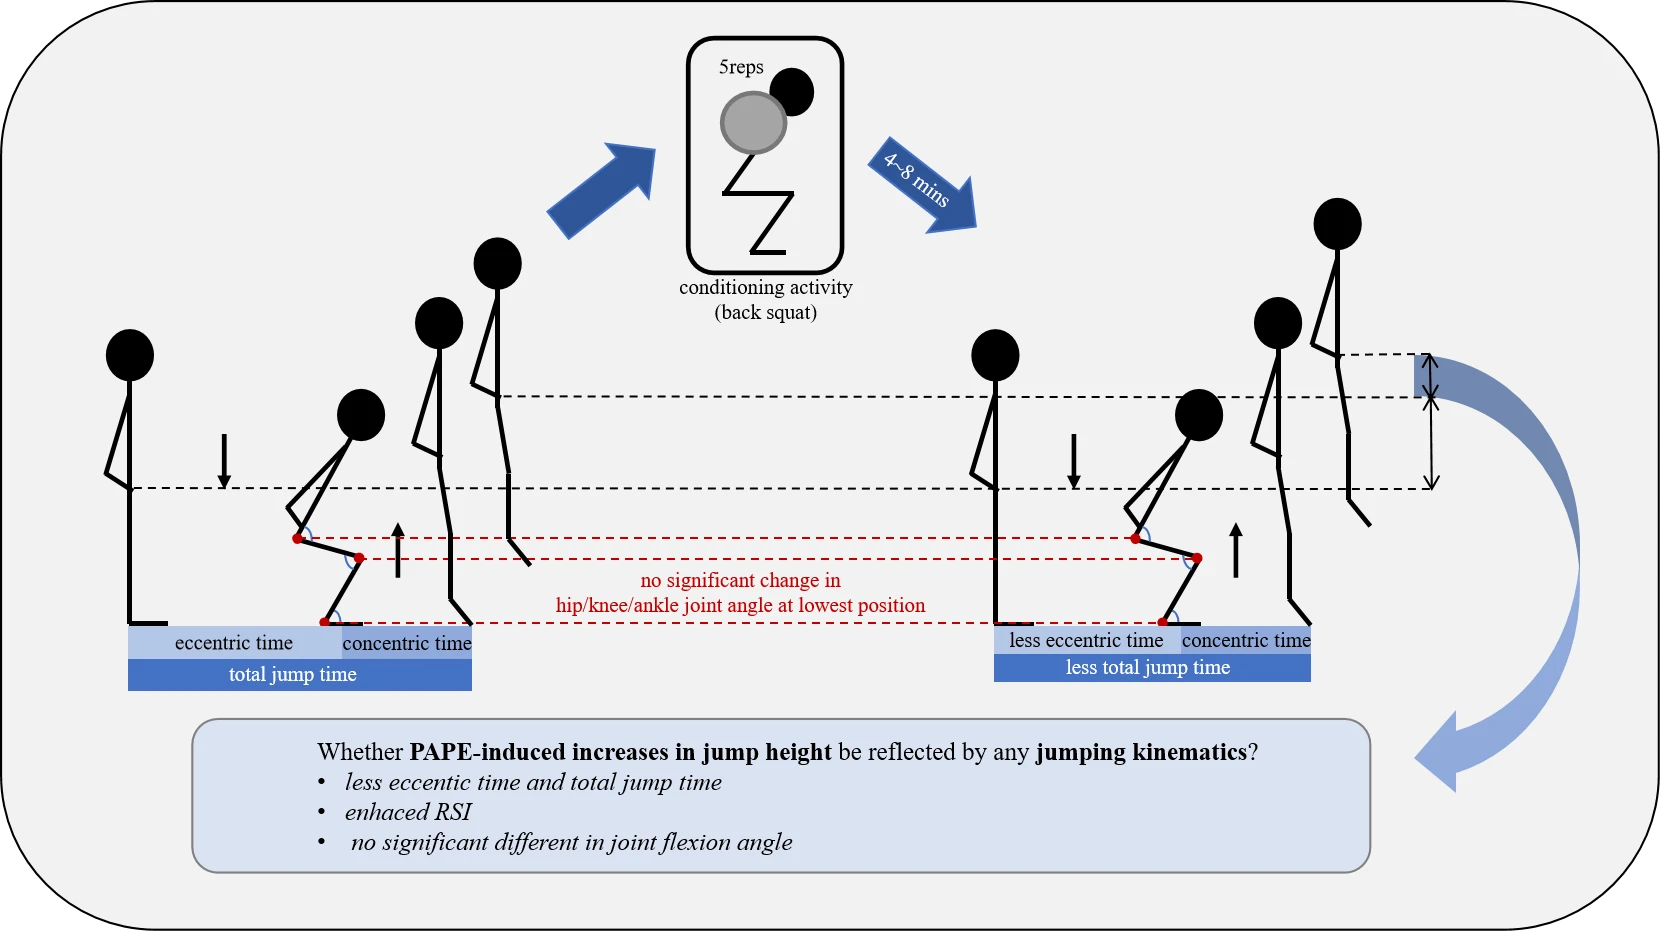 Can PAPE-Induced Increases in Jump Height Be Explained by Jumping Kinematics?